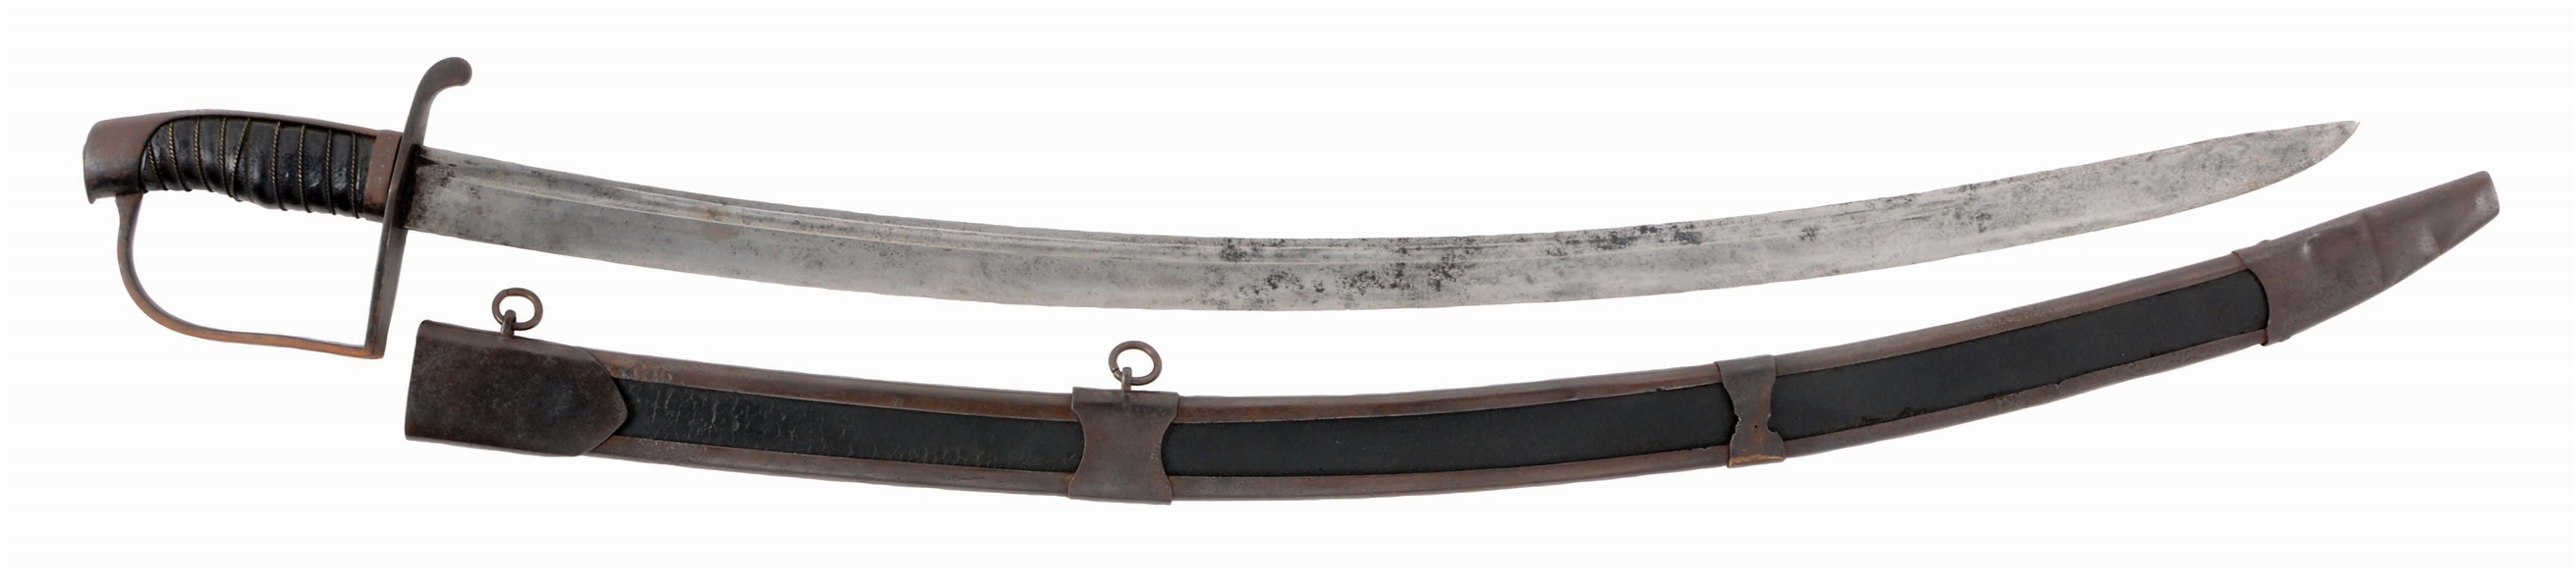 RARE U.S. MODEL 1807 CONTRACT CAVALRY SABER BY ROSE, WITH SCABBARD.